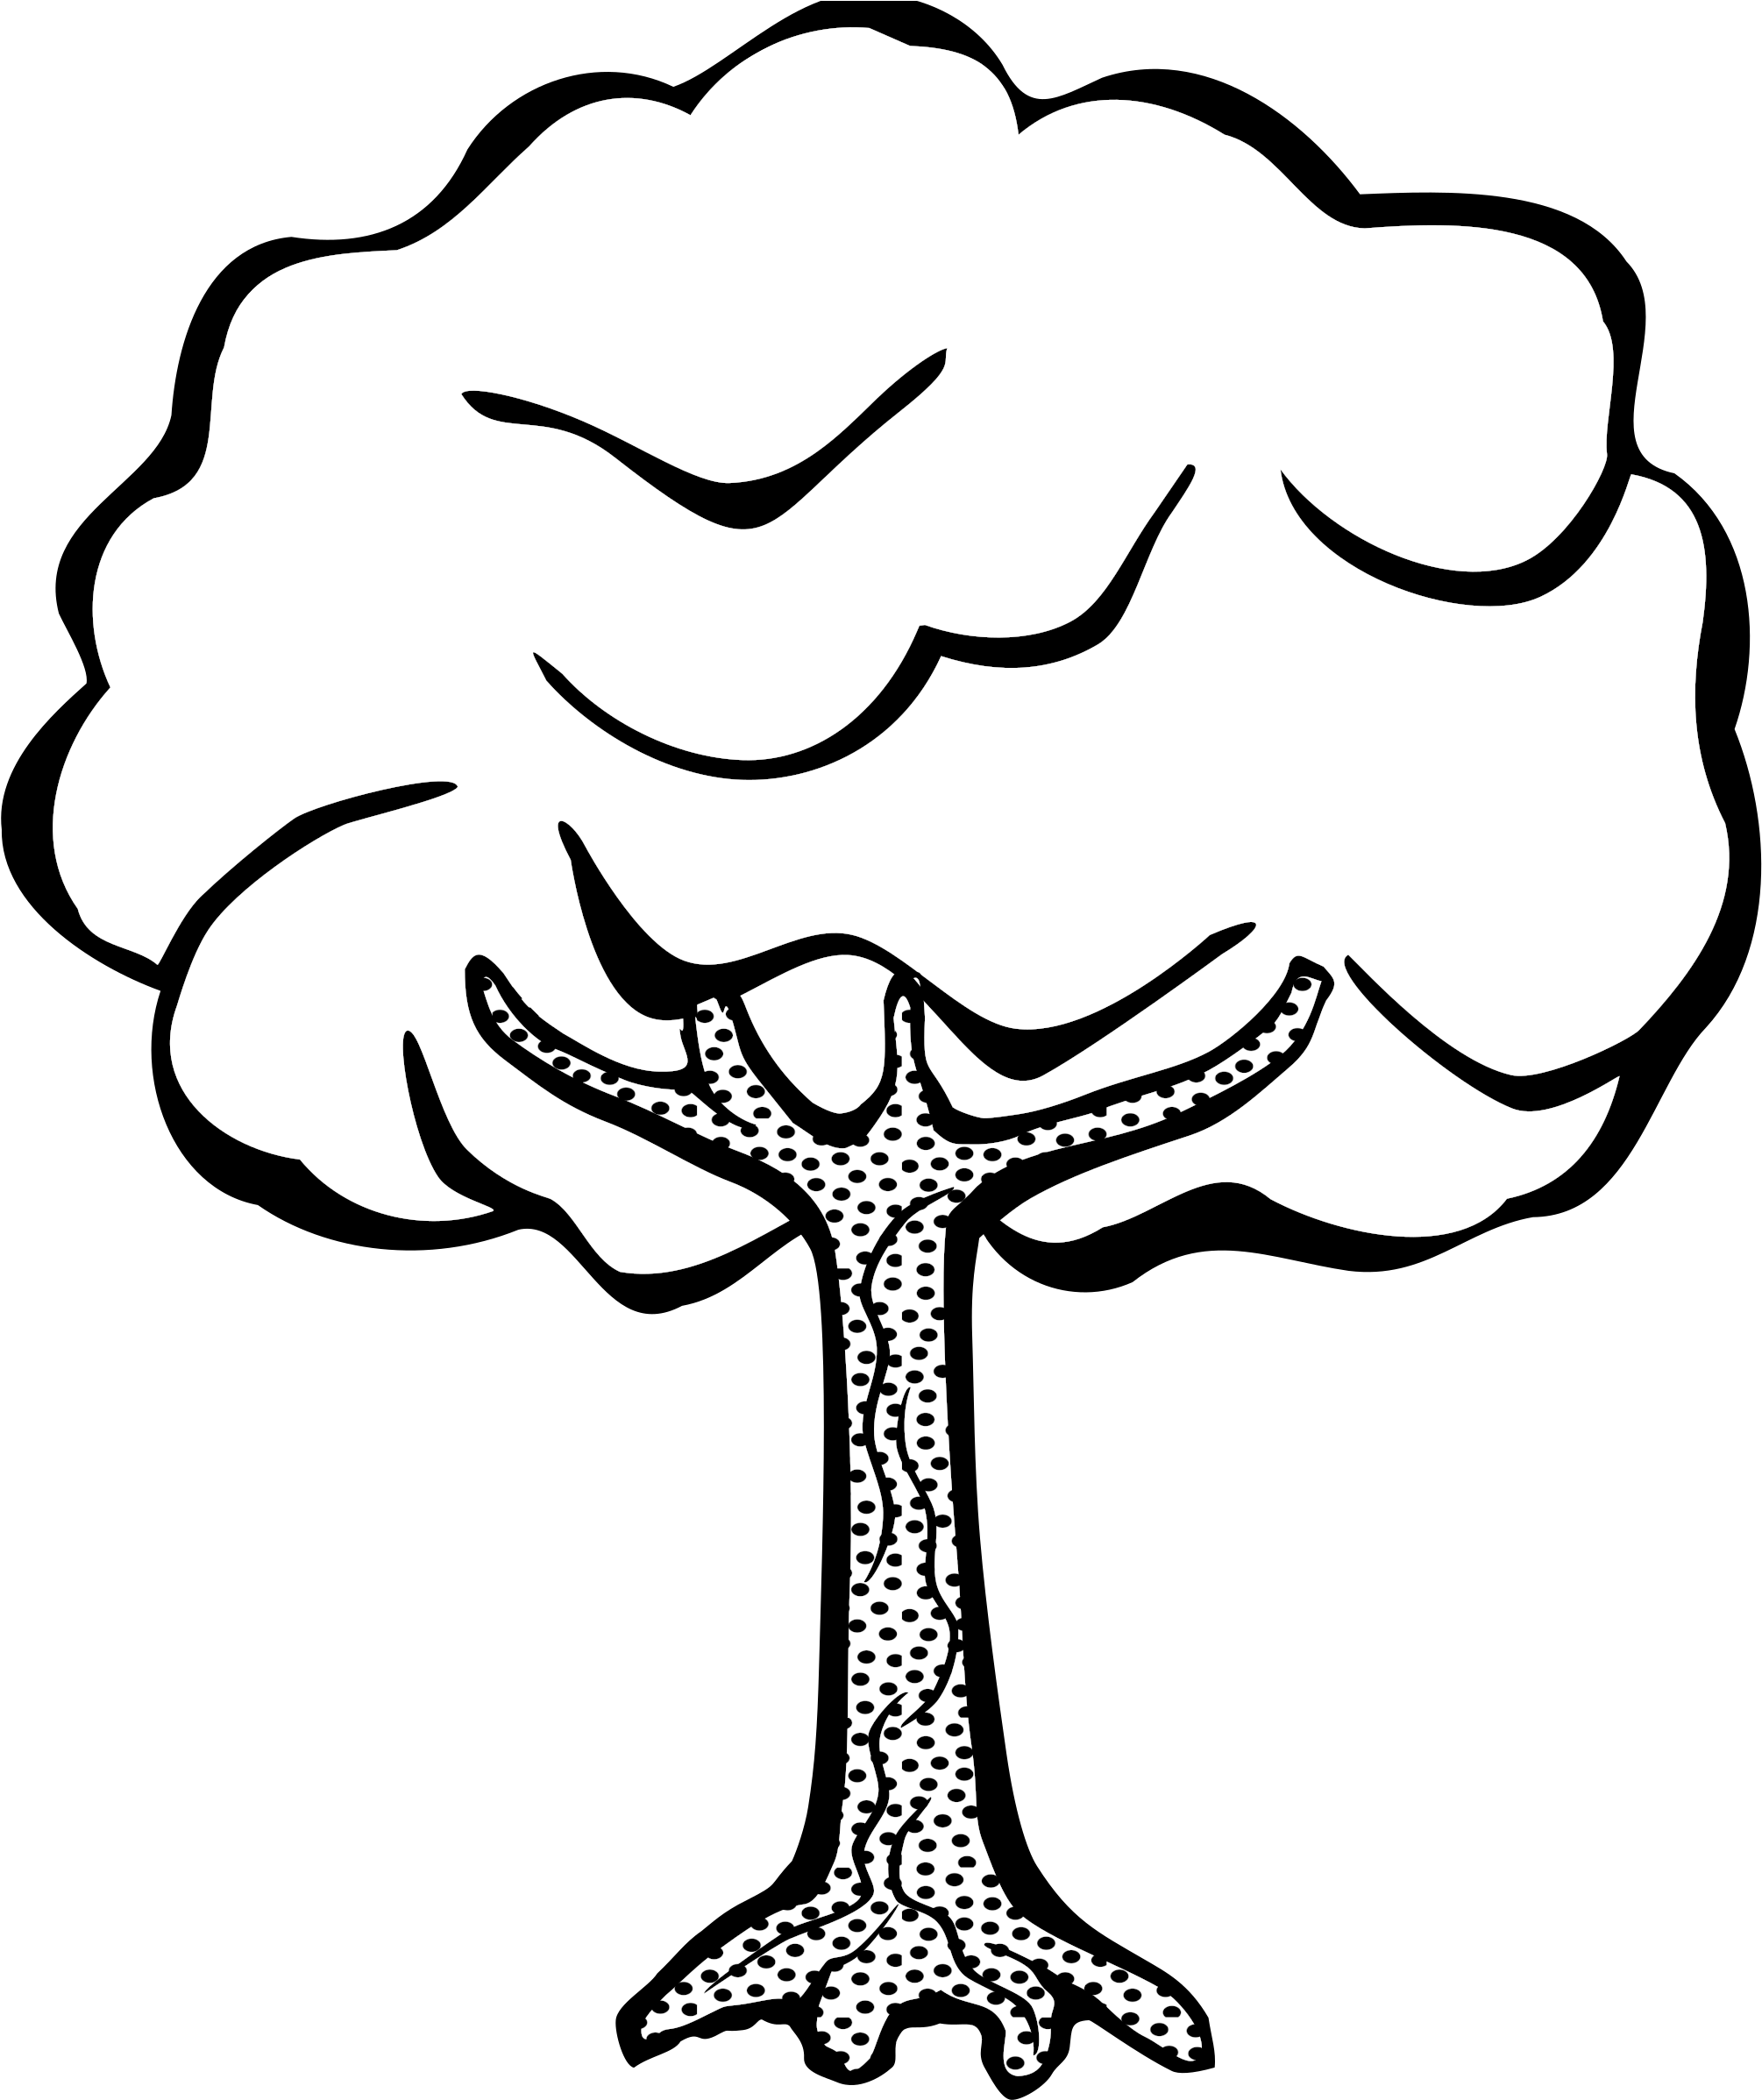 Big Image - Tree Clipart Black And White (2400x2400)